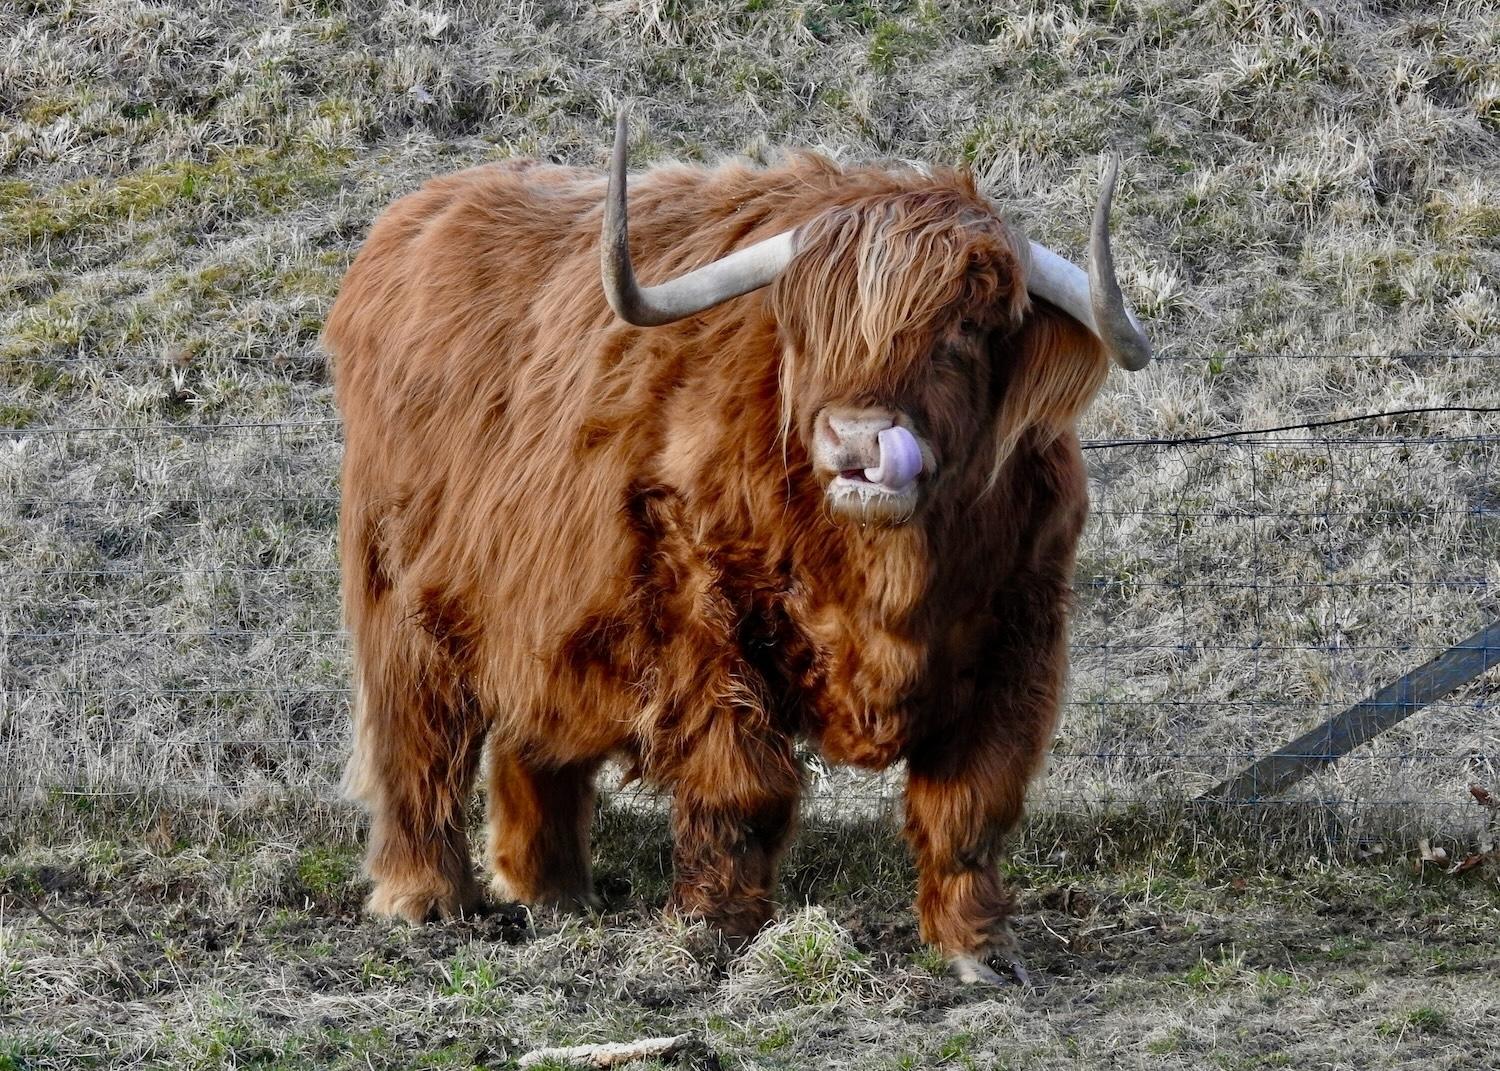 After reindeer, the most interesting mammal we see on Wilderness Scotland's Winter Wildlife trip is Murdo the Highland cow at Castle Roy.